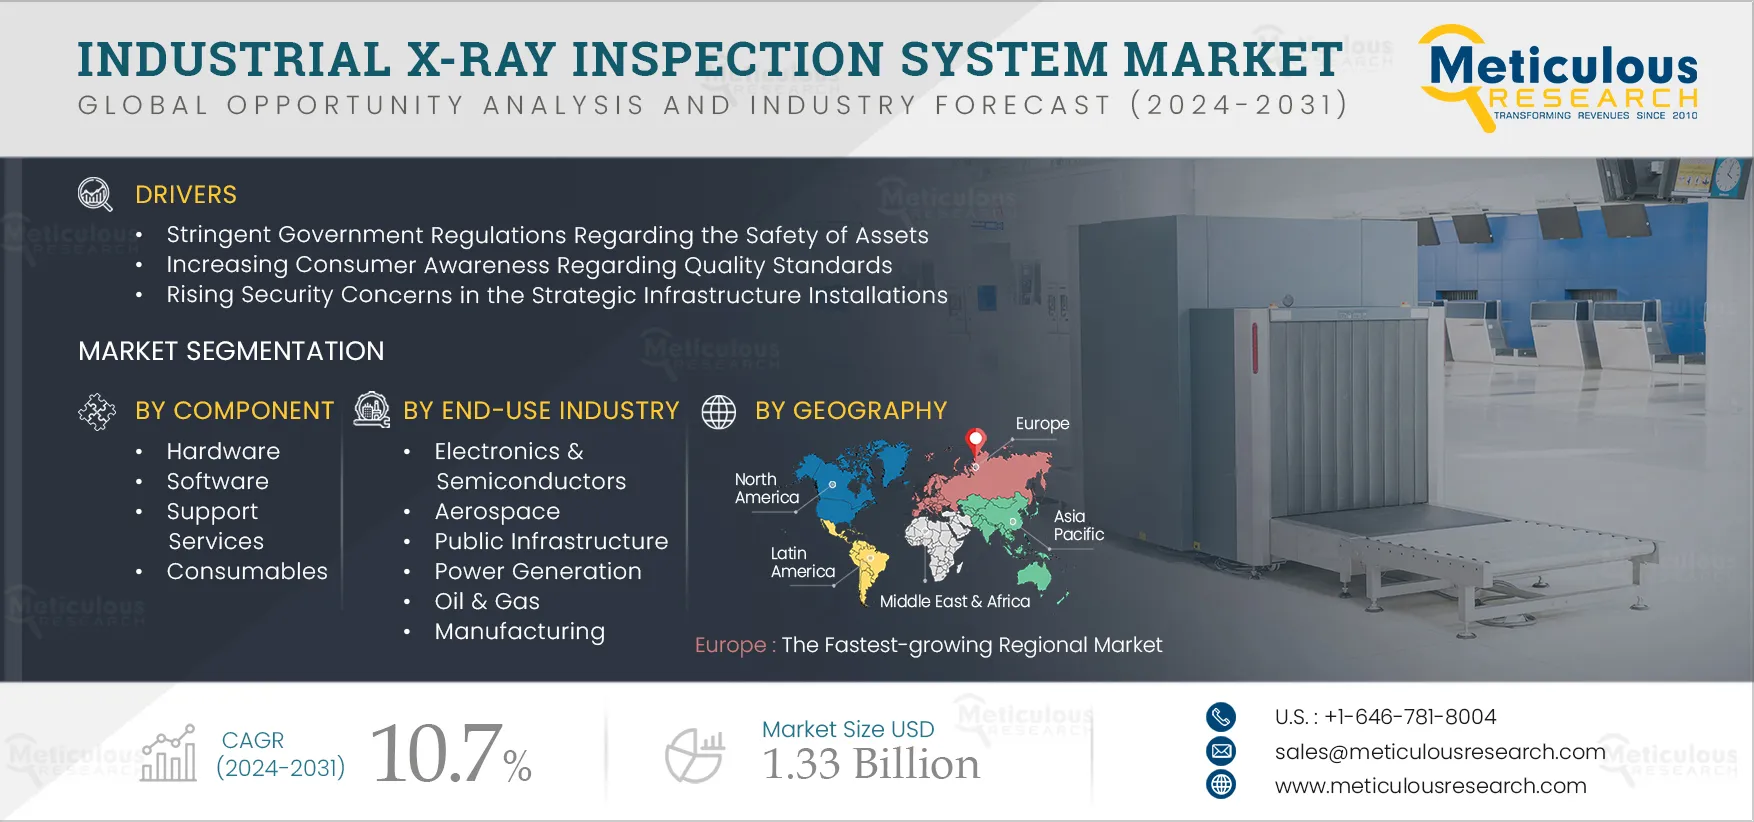 Industrial X-Ray Inspection System Market 